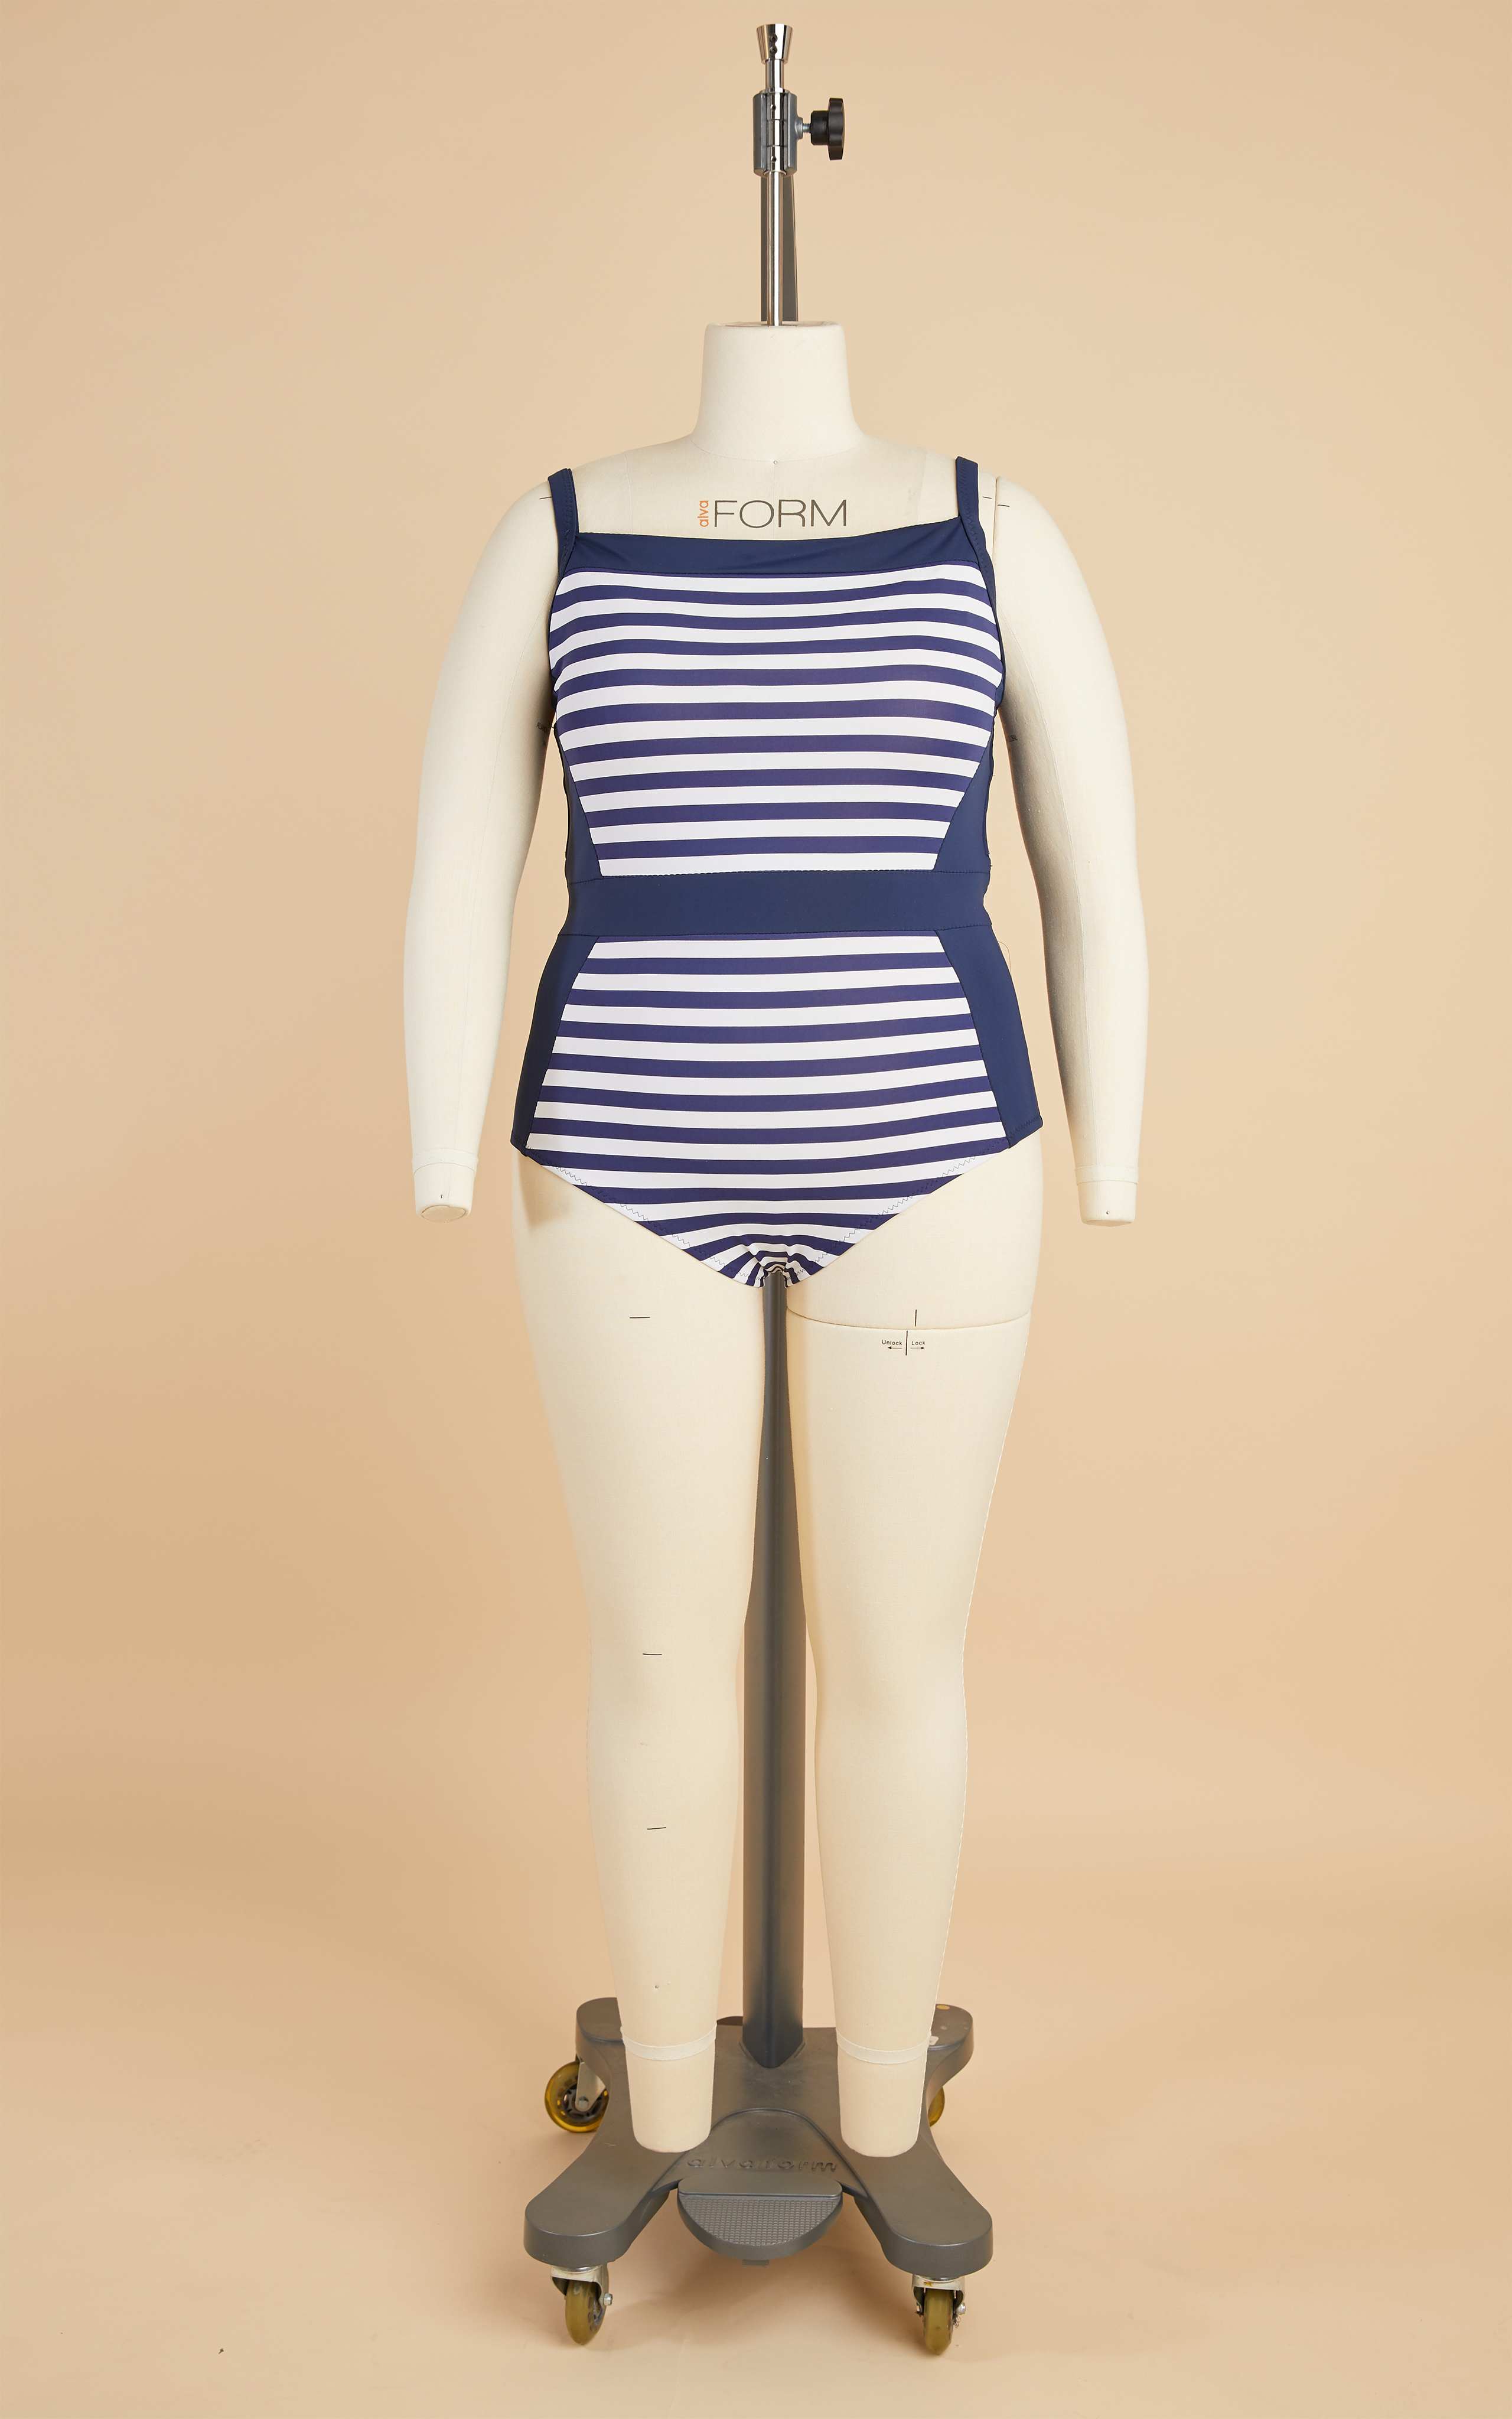 Ipswich Swimsuit in Sizes 12-32, and Introducing Cashmerette Swim Week!